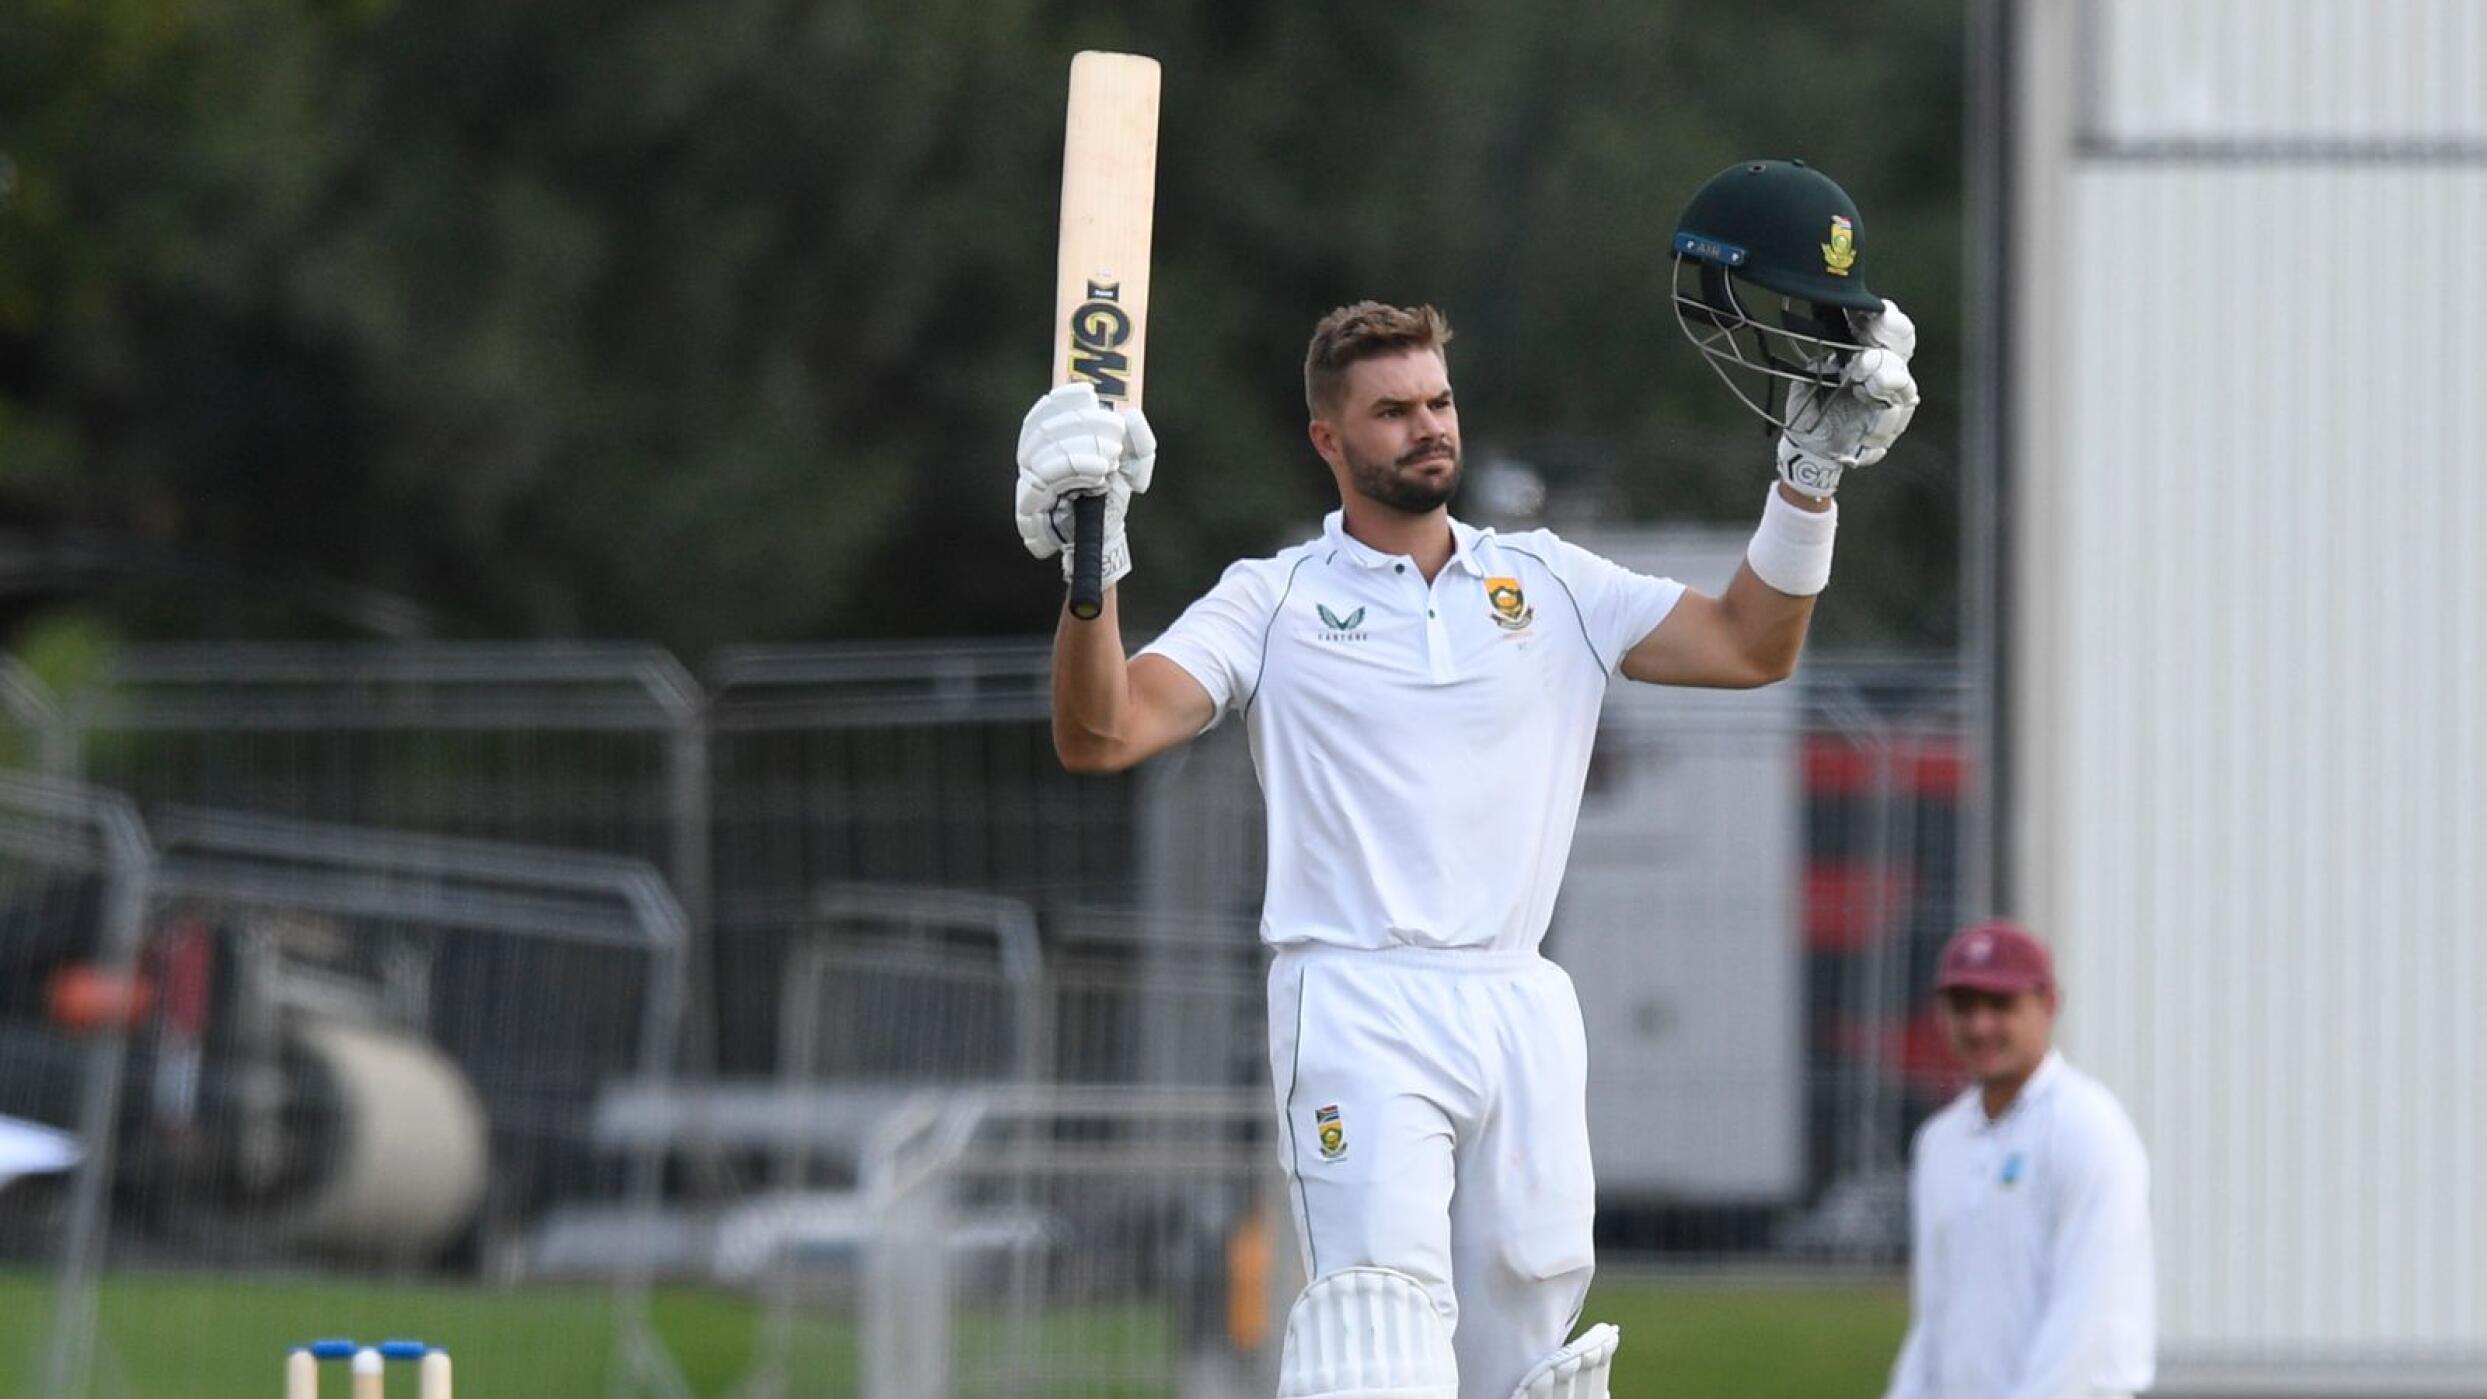 South Africa’s Aiden Markram celebrates after scoring 100 runs during day one of the first Tet against the West Indies at SuperSport Park in Centurion on Tuesday